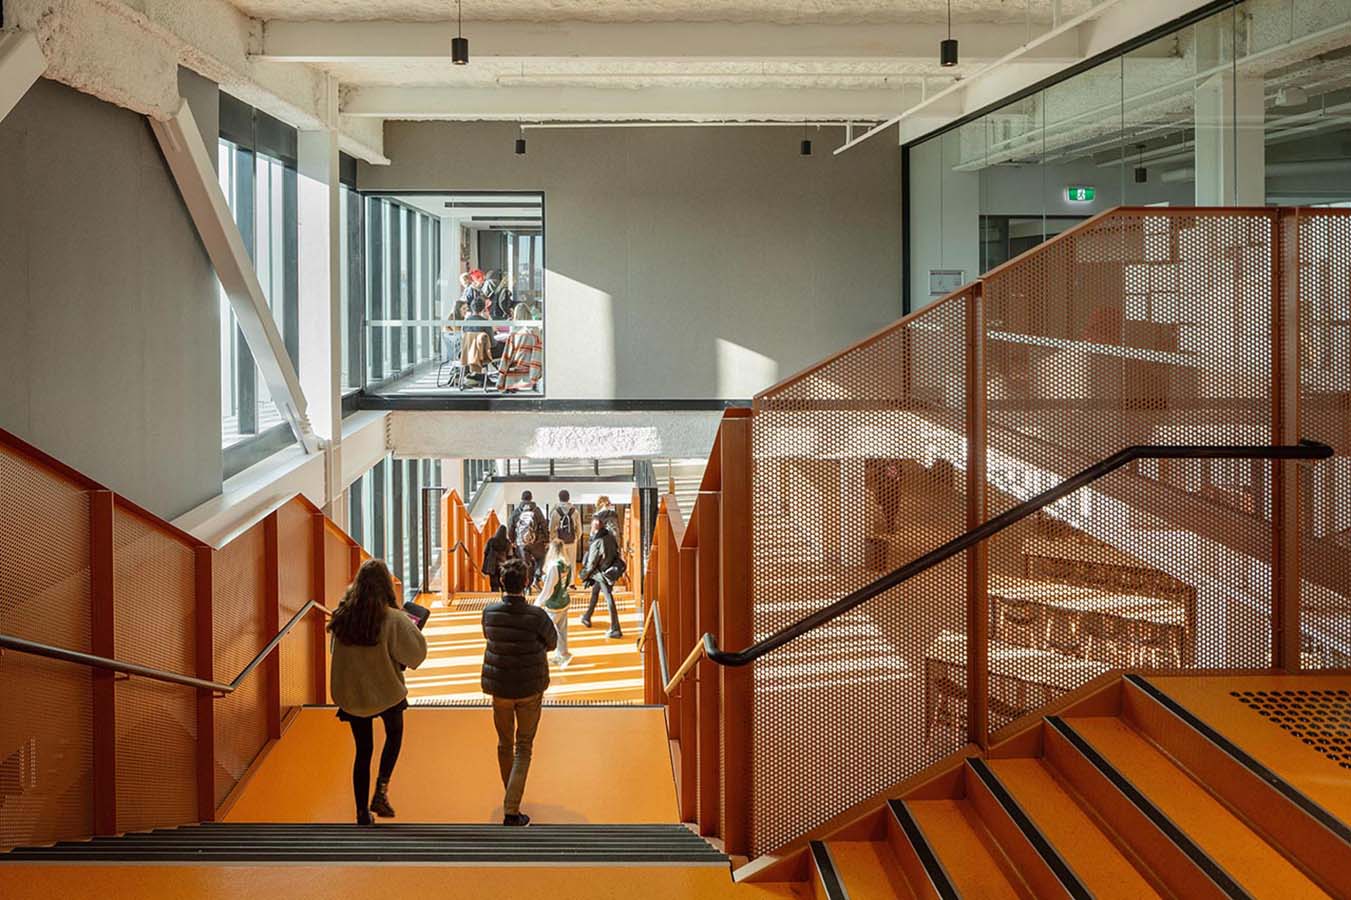 The main stair is integrated with learning spaces